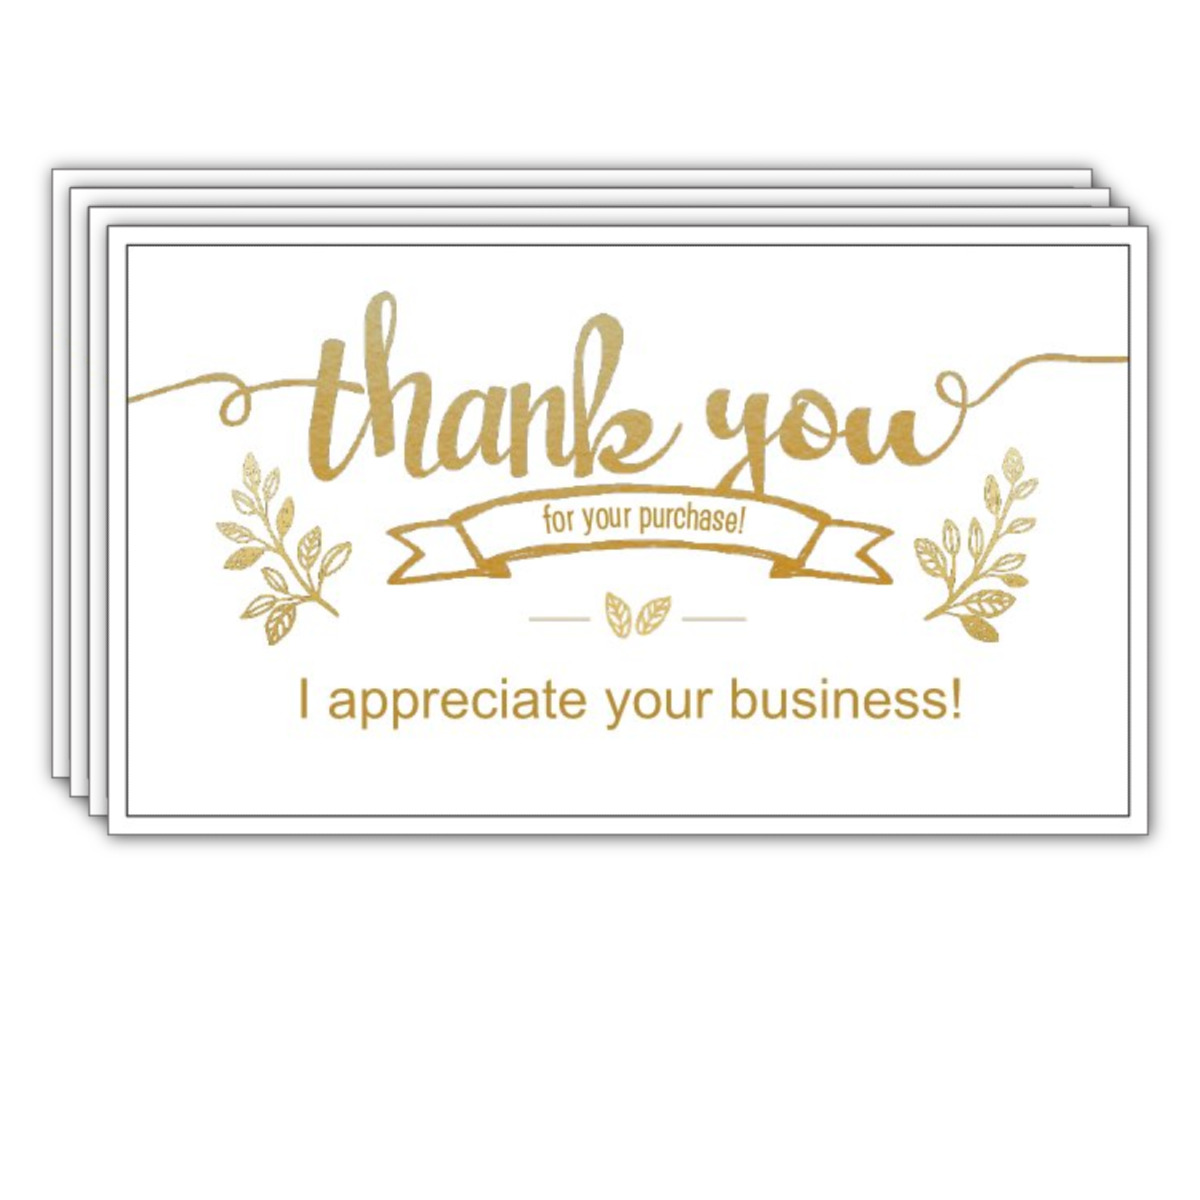 100x Business Cards, Thank You for Your Purchase White Gold, Appreciate Your Biz